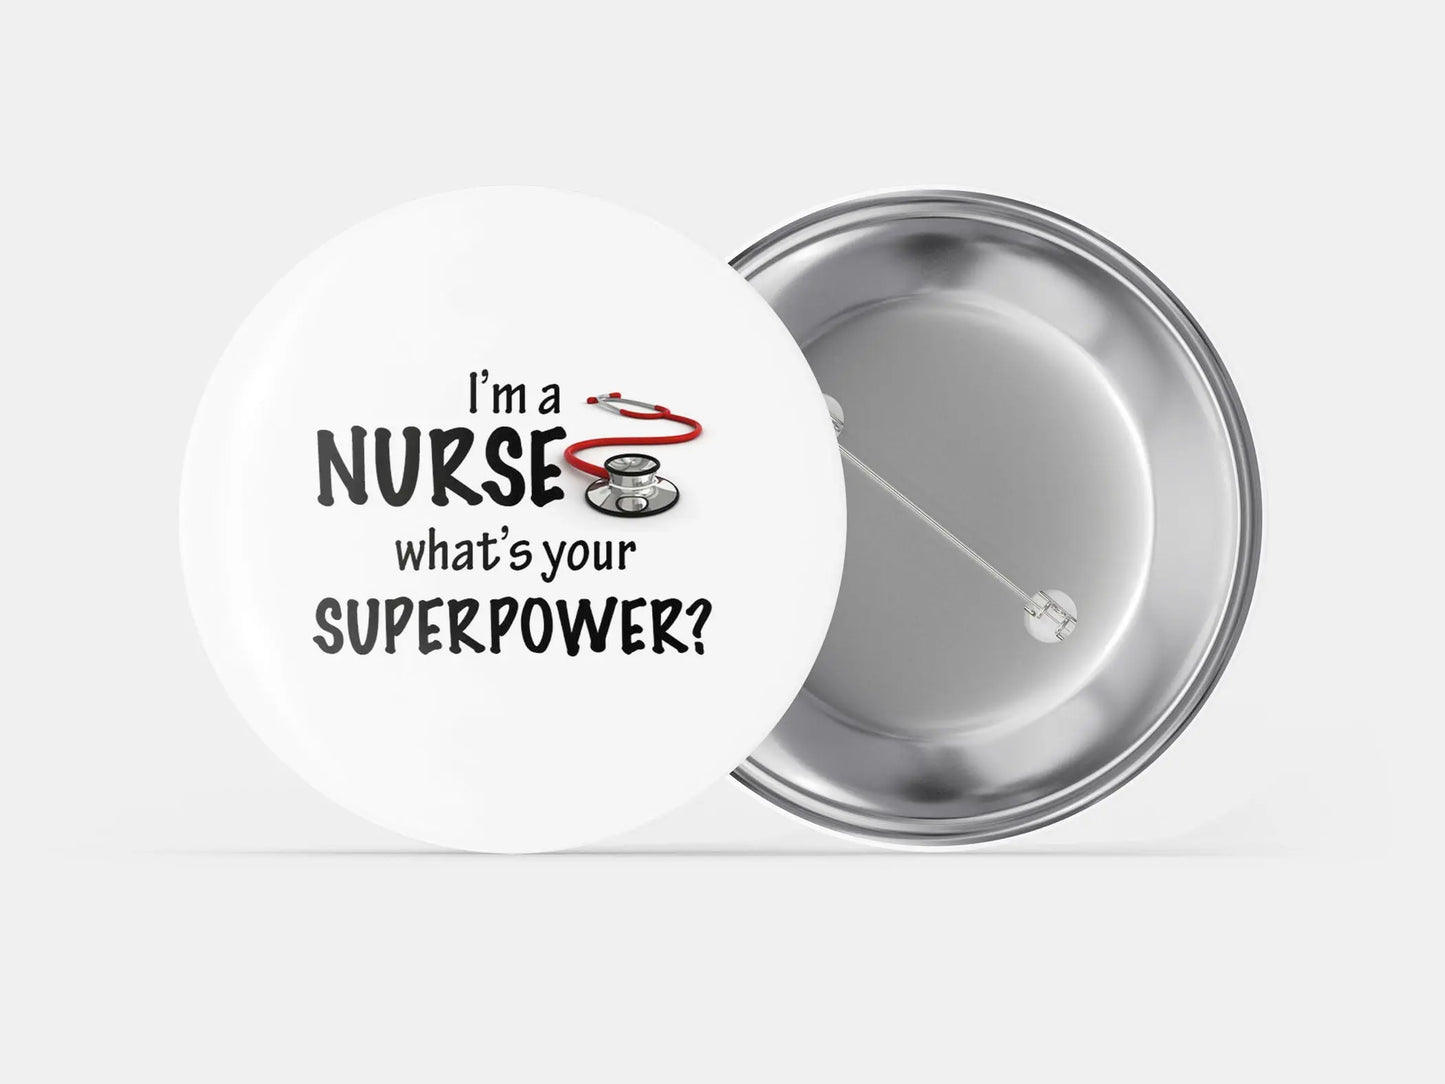 Nurse Superpower - Medical Nurse Badge - Health Personalized Giveaways - Profession Career Button Pins - 10 pieces